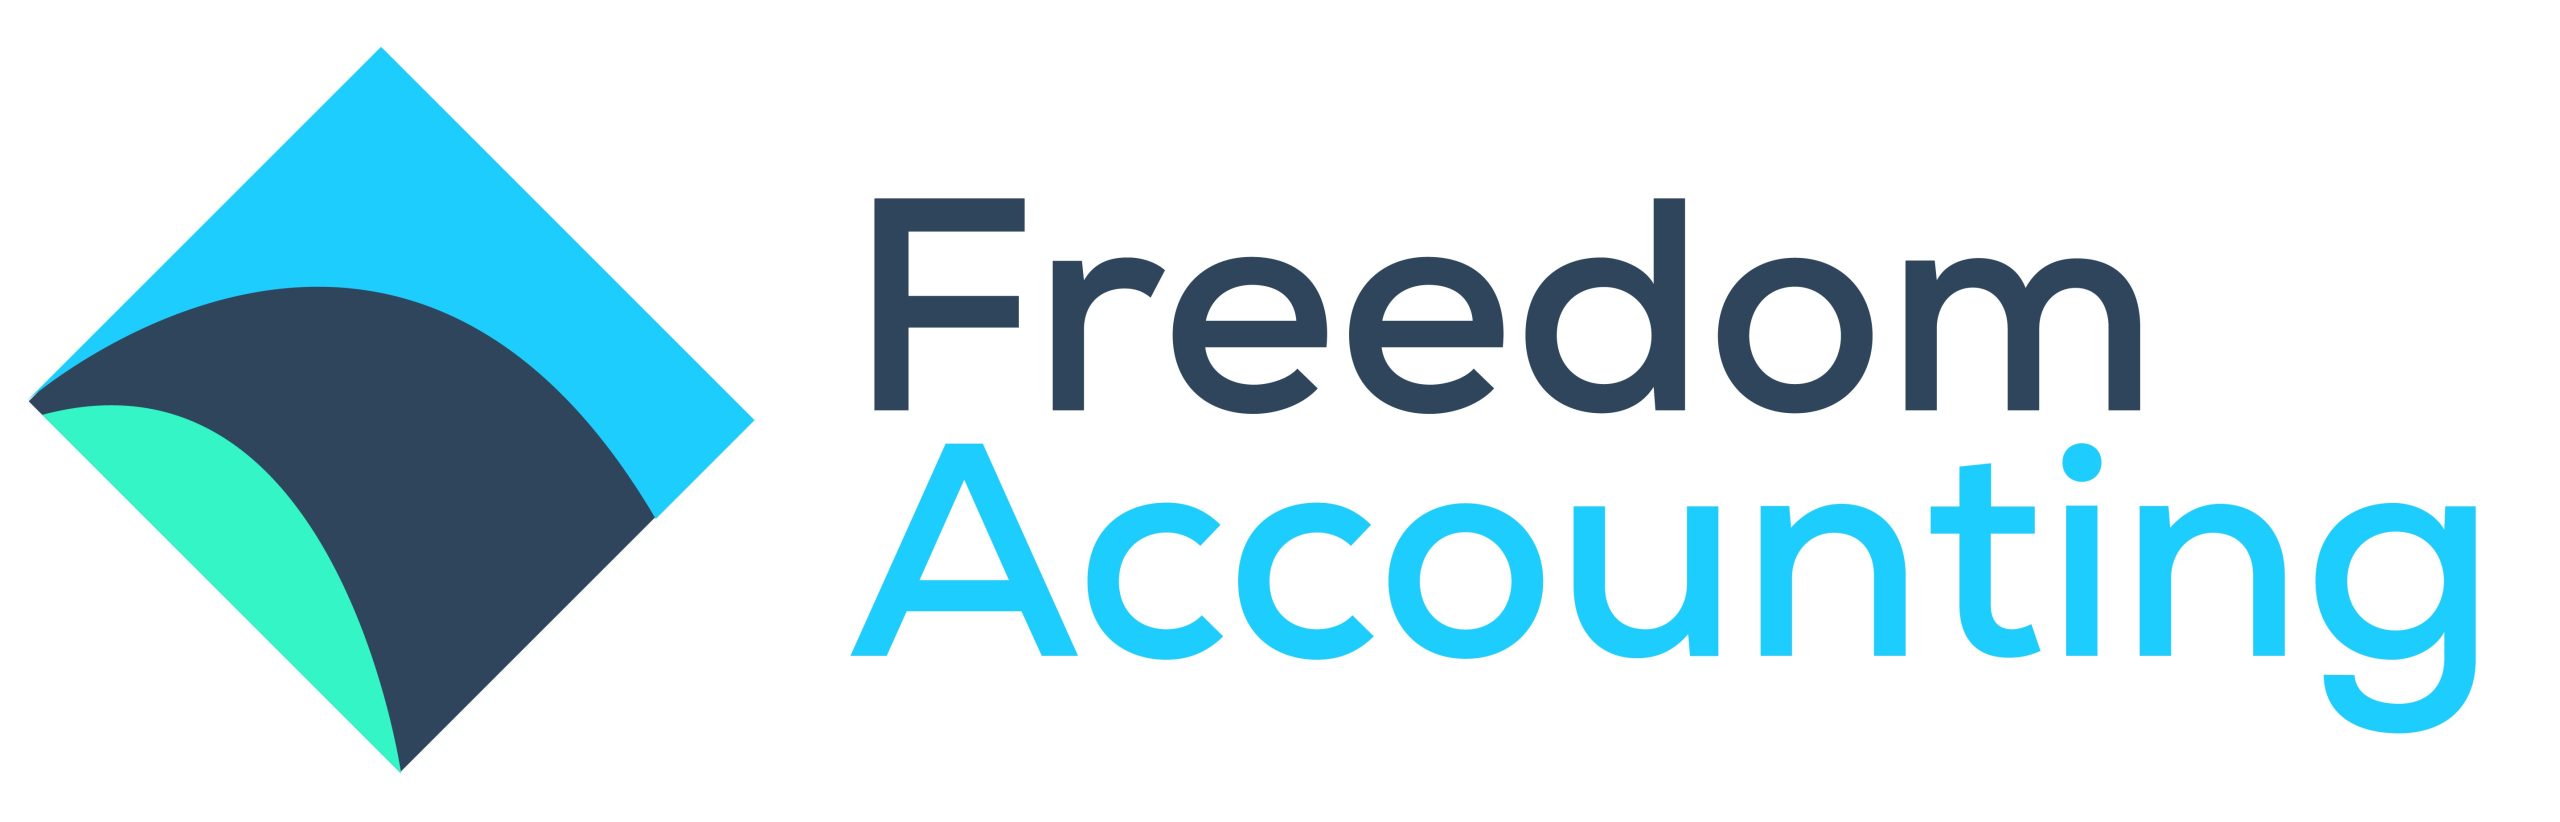 Freedom Accounting Services